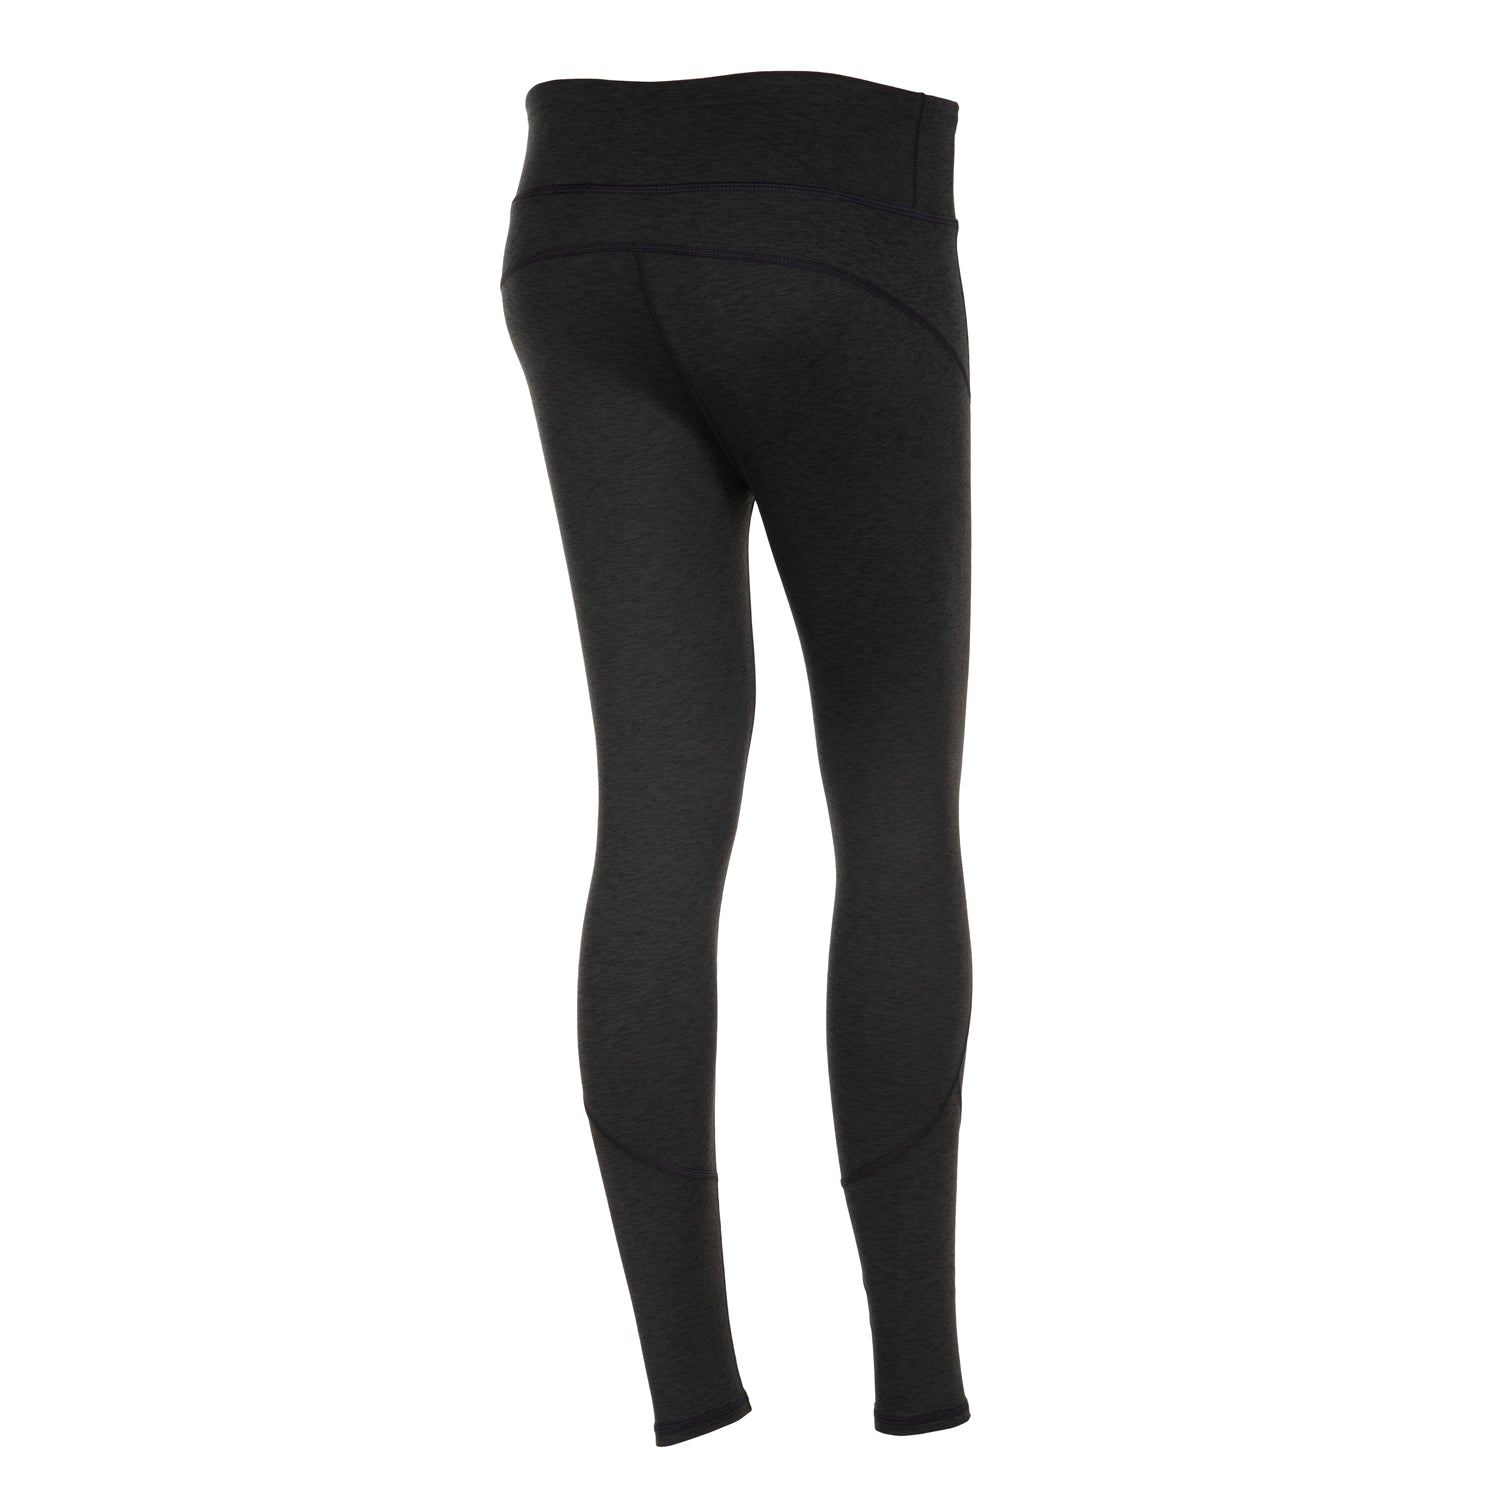 L. 6/8 TIGHTS BE ONE Running leggings - Women - Diadora Online Store IN